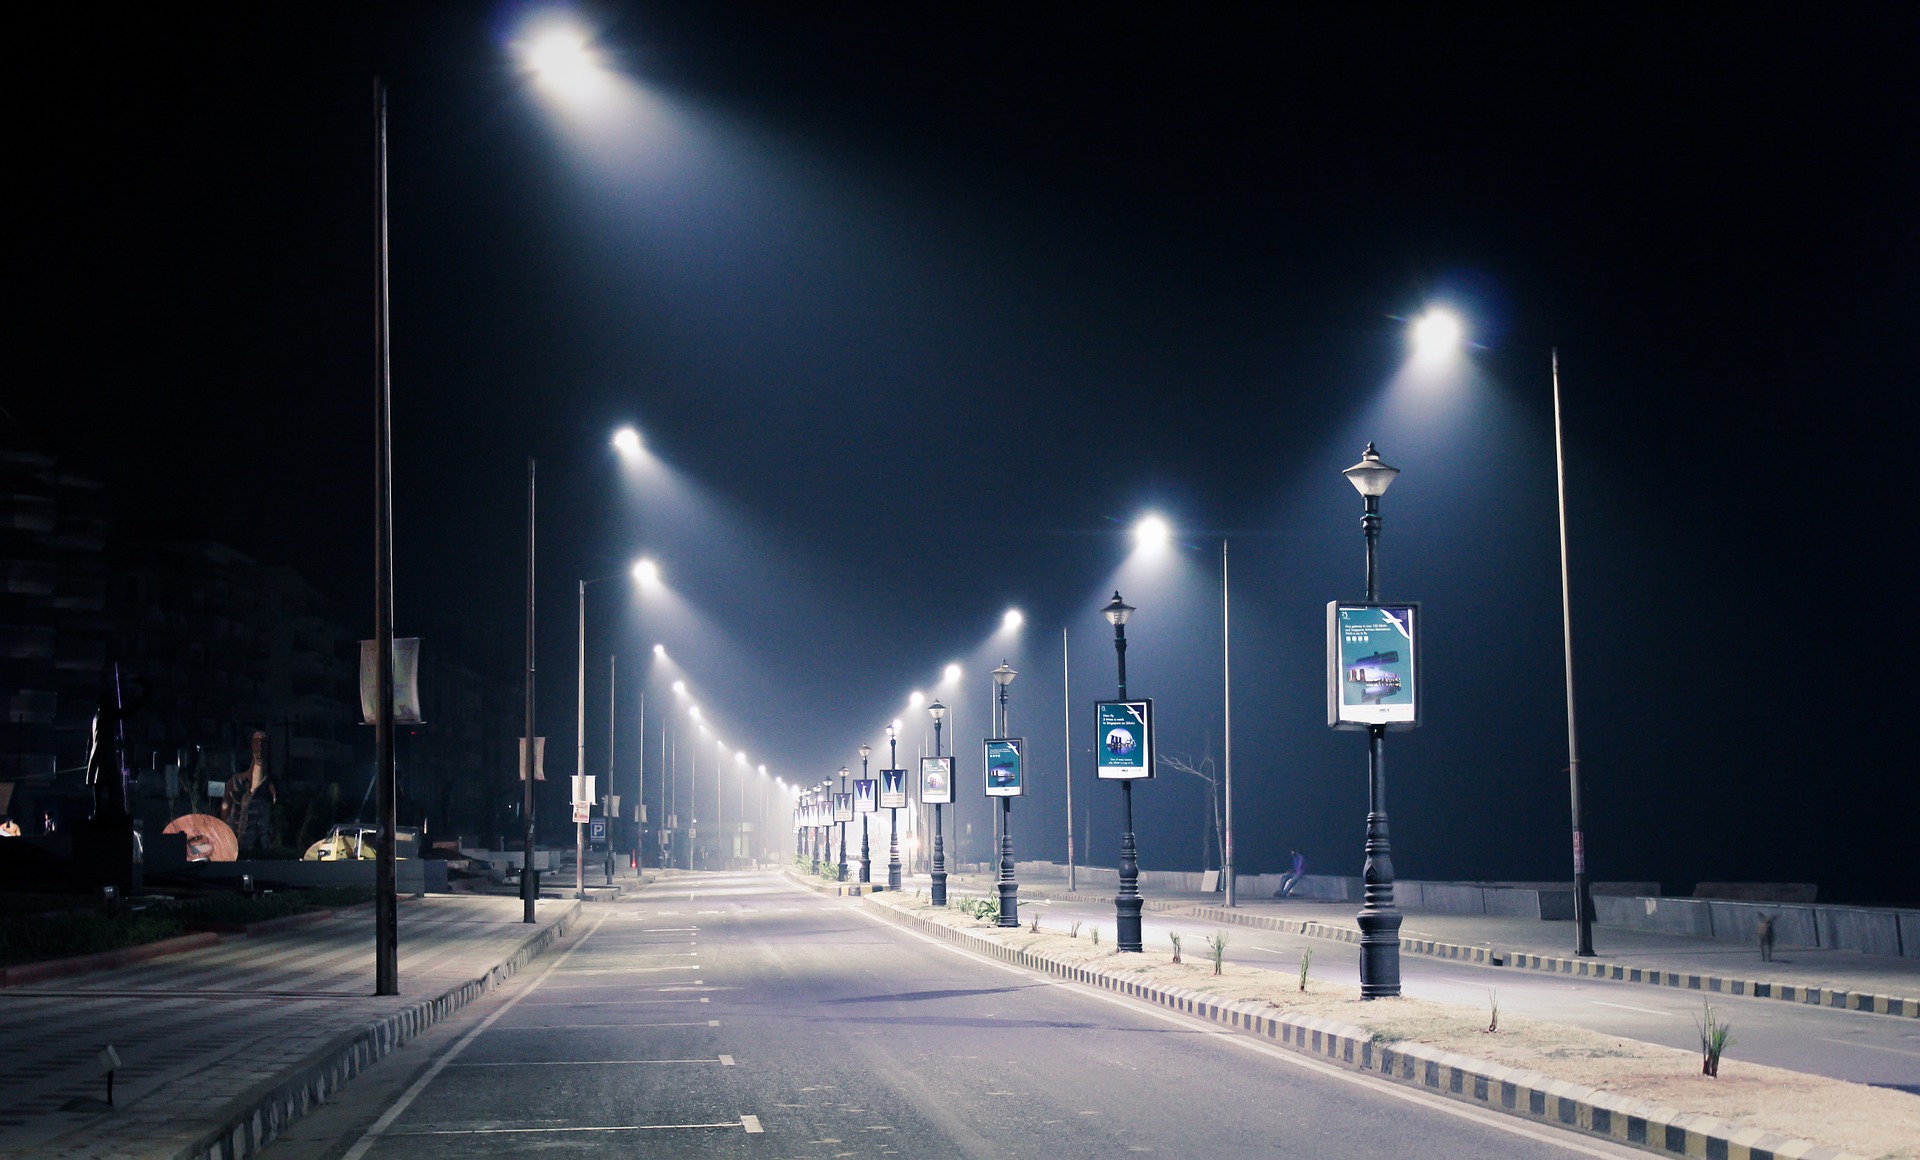 LED Street Lights May Make Cities Smarter - And Increase Surveillance